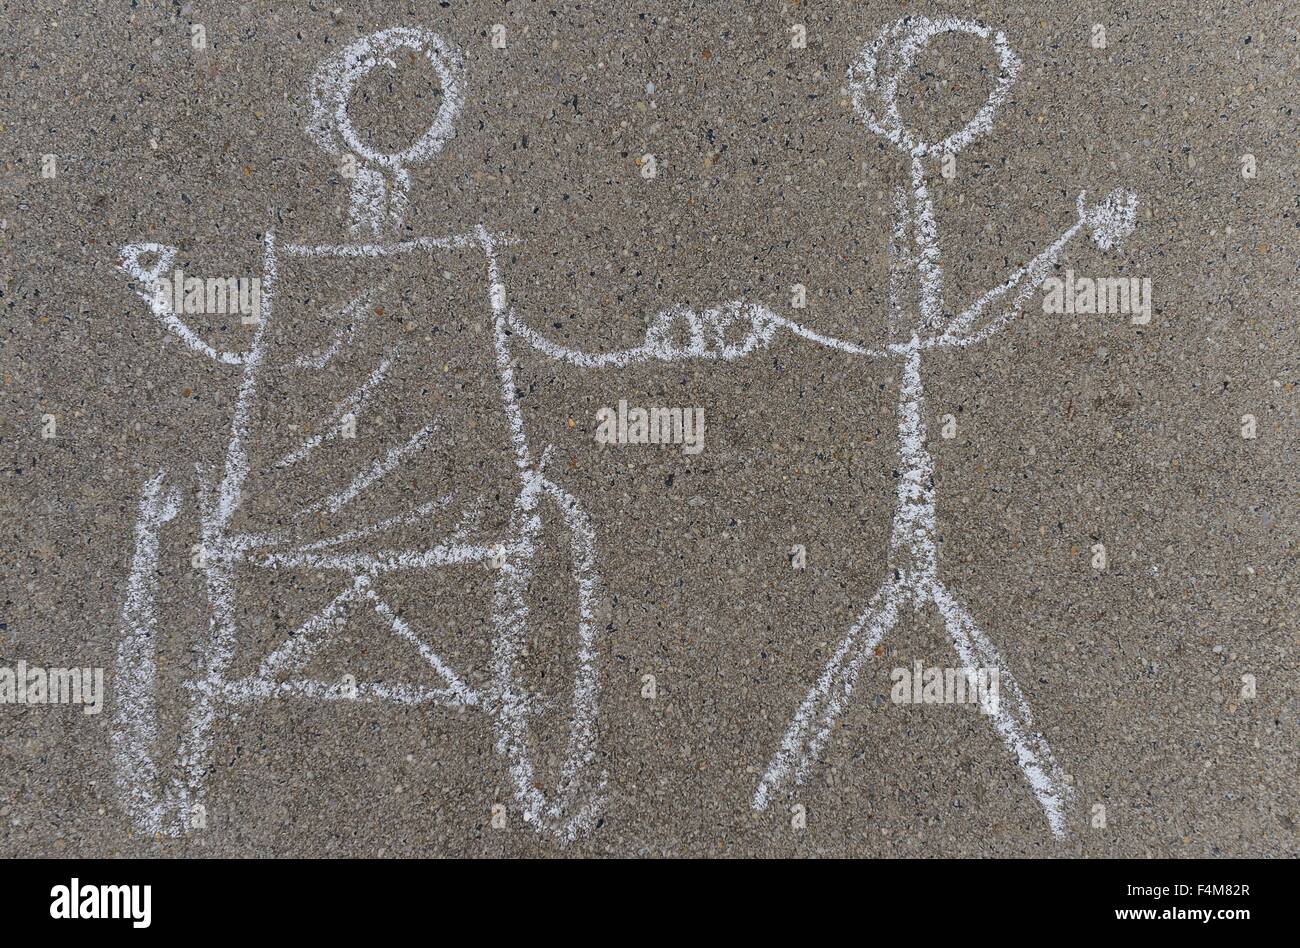 A chalkdrawing that shows a handicapped person and a non handicapped person. Stock Photo